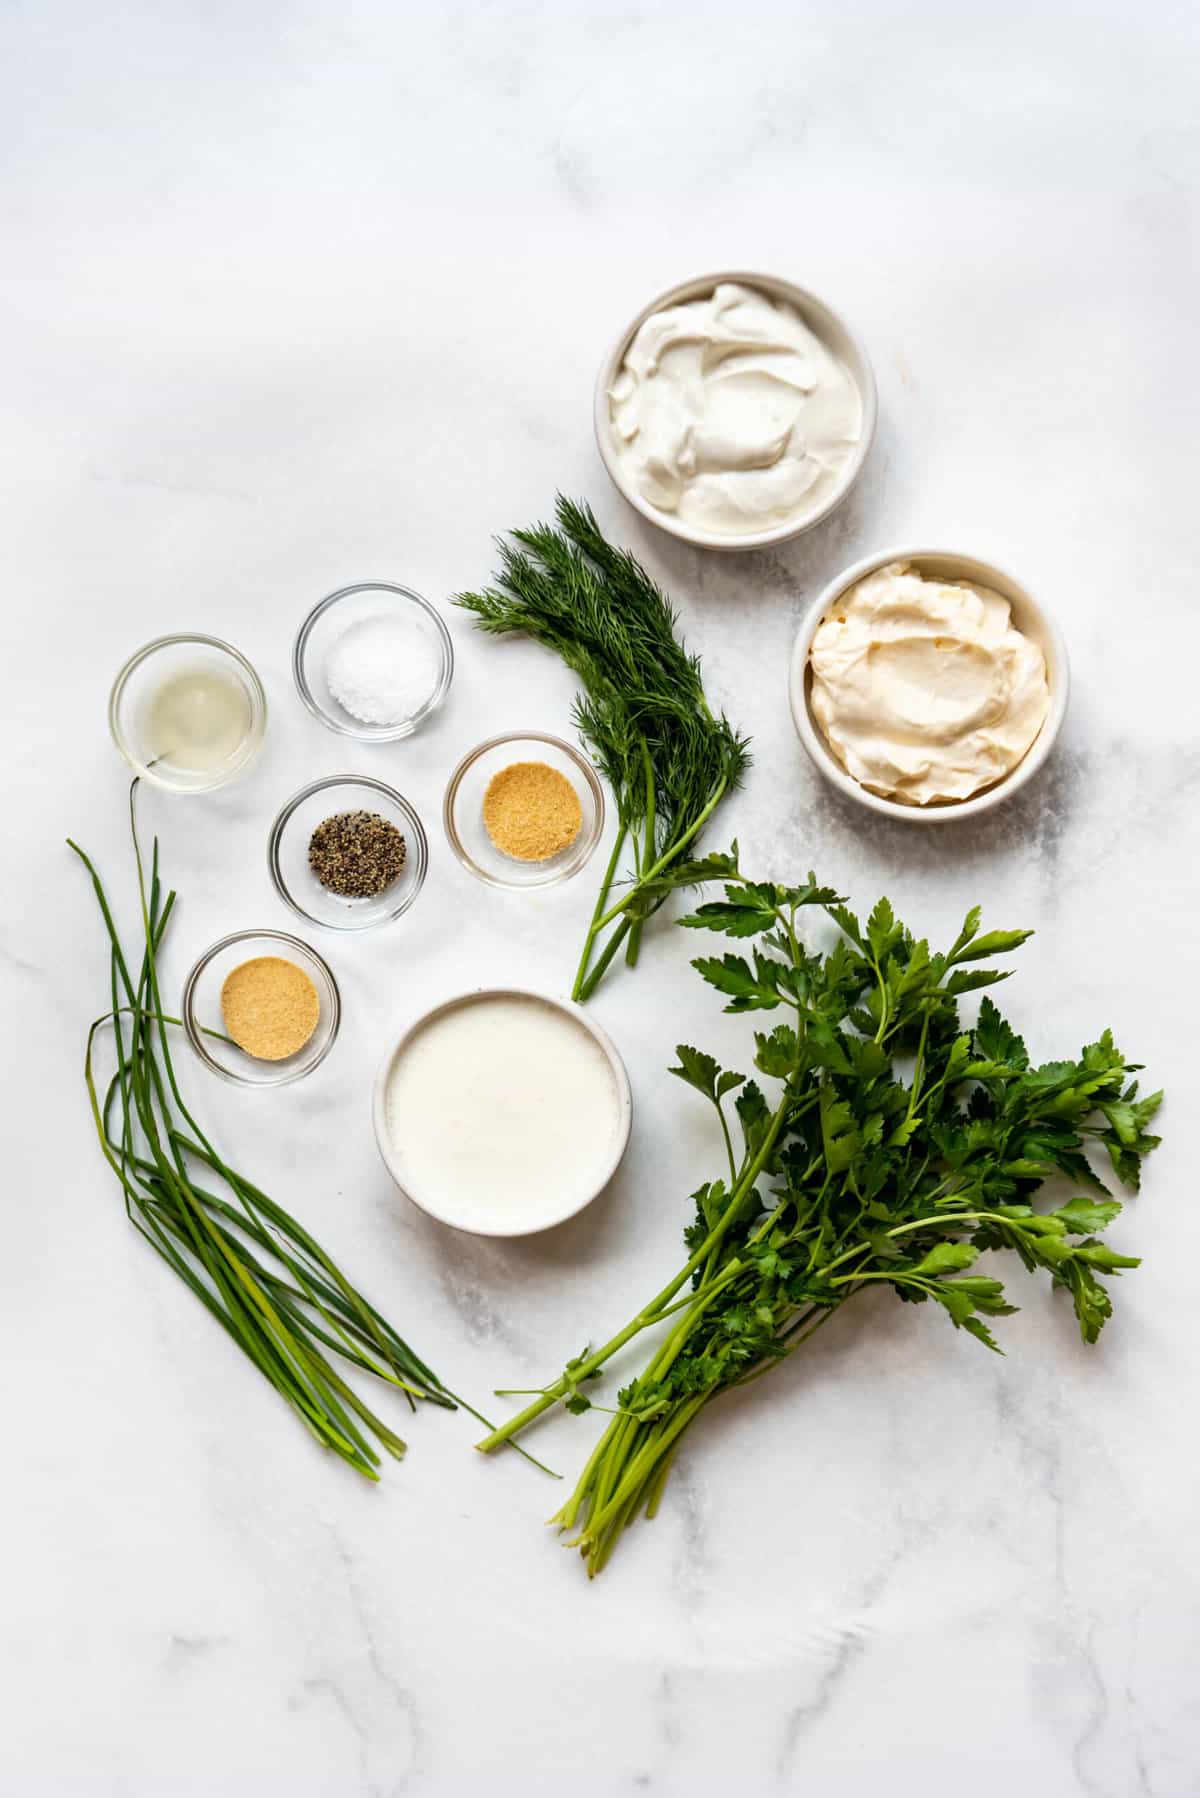 Ingredients for making homemade ranch dressing.